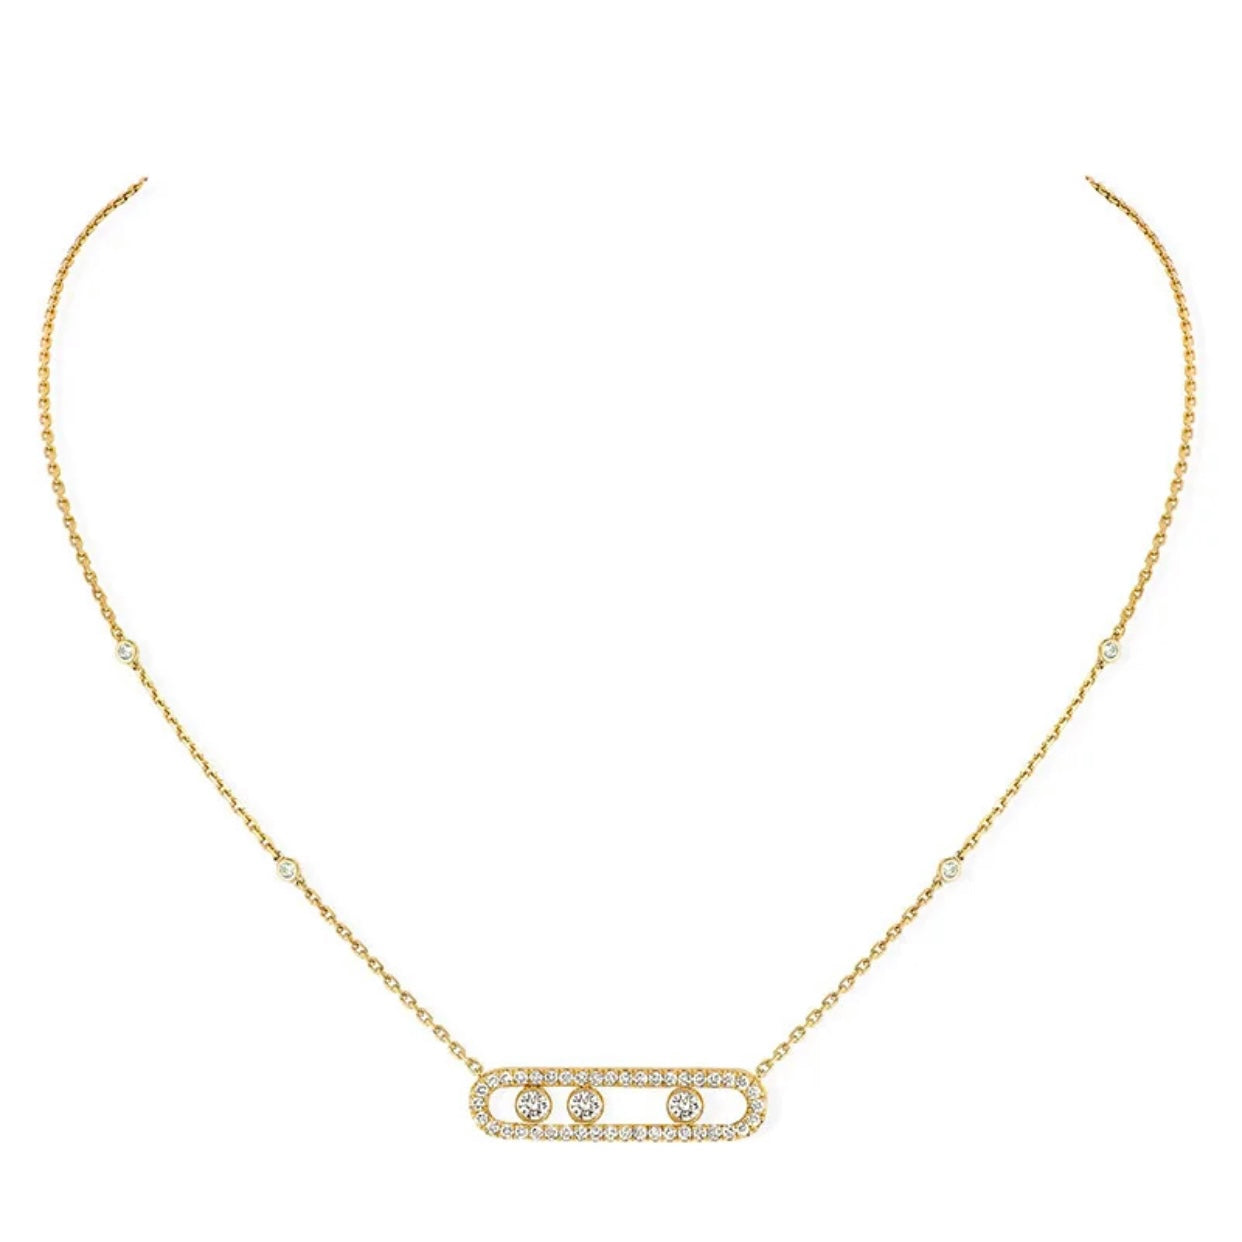 ACANTHA STERLING SILVER 3 DIAMONDS NECKLACE